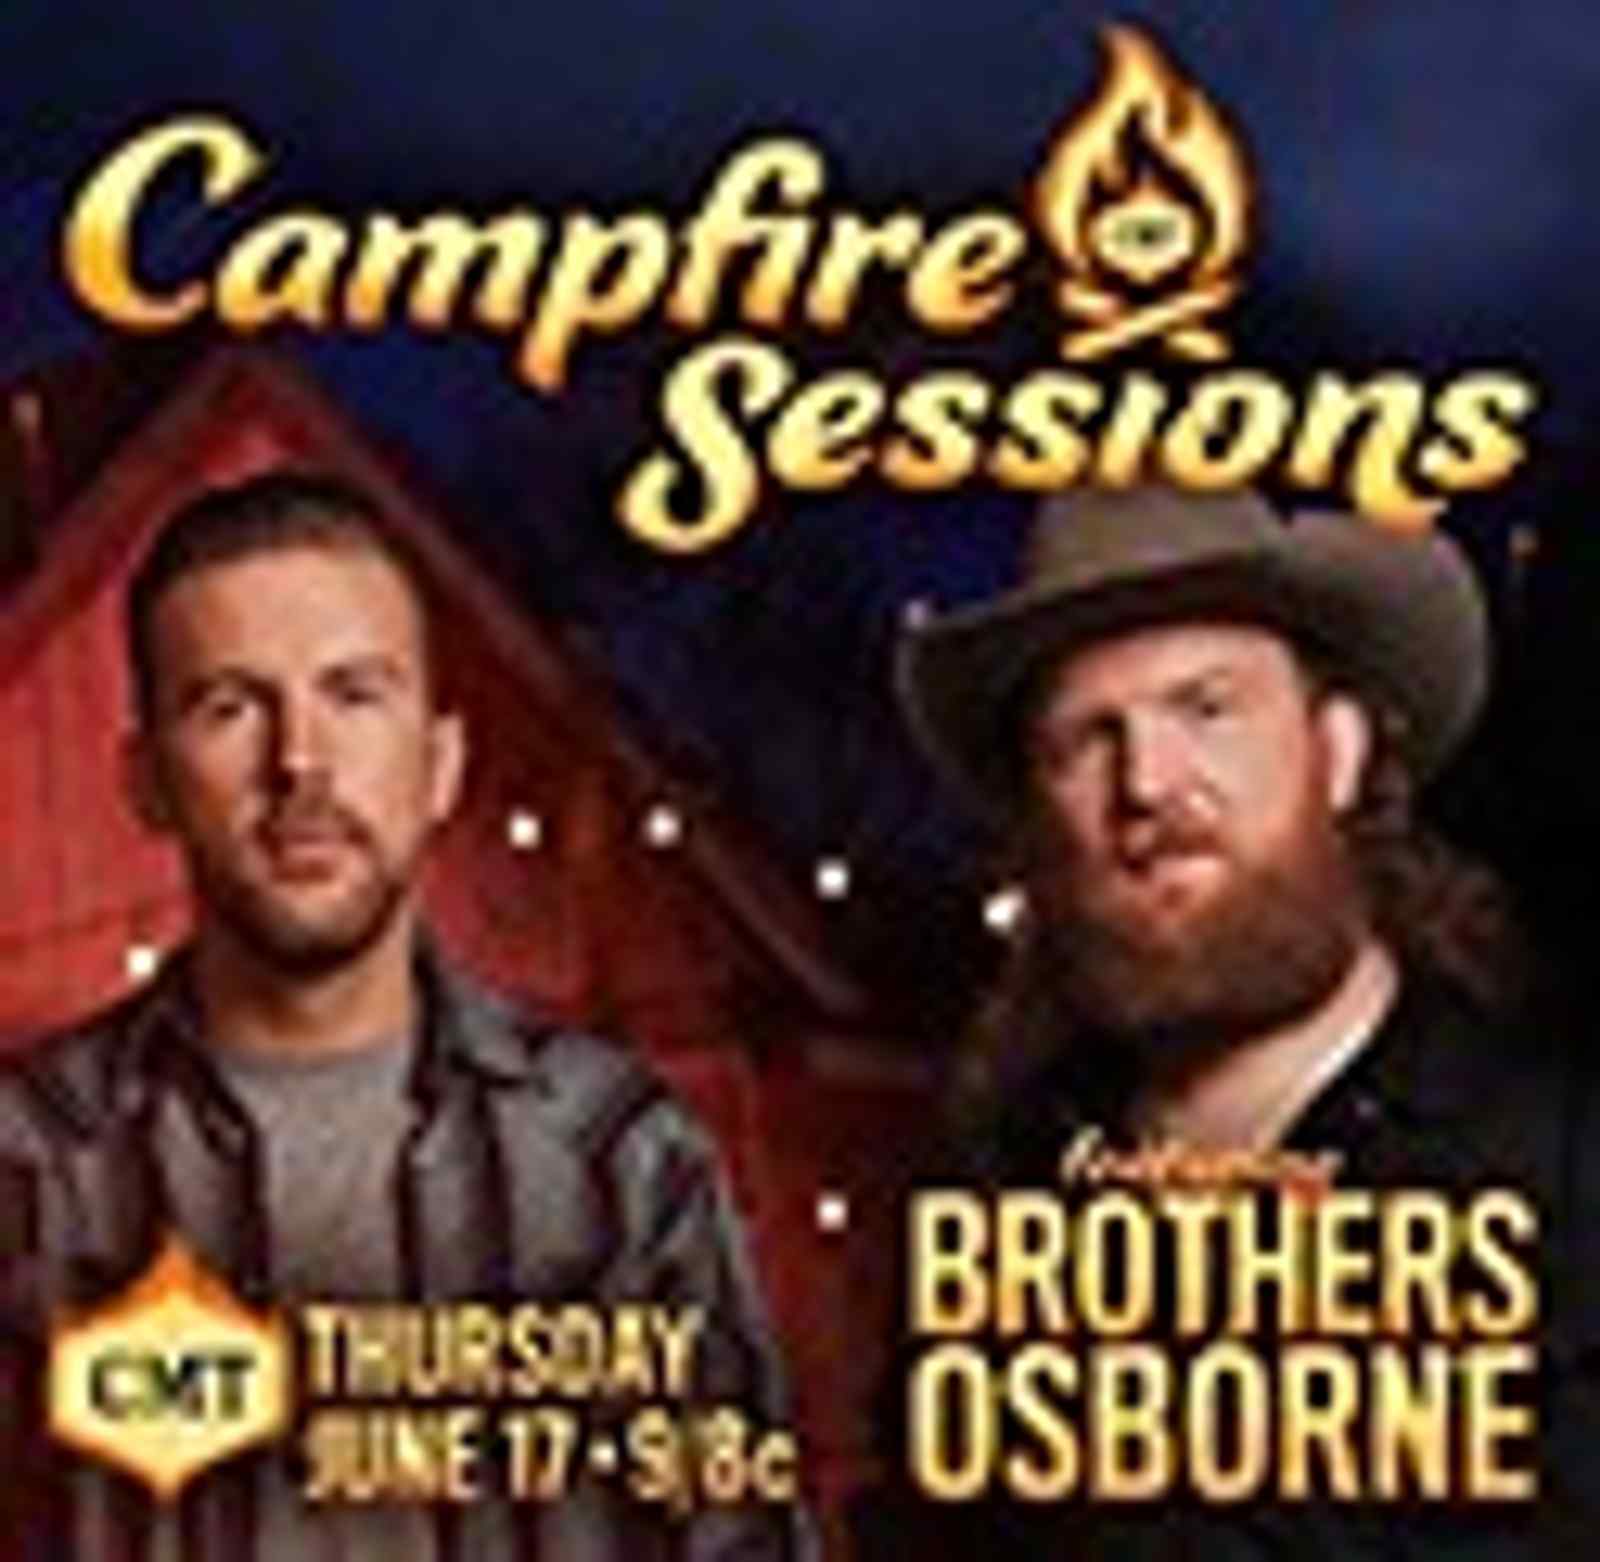 CMT Campfire Sessions: Brothers Osborne